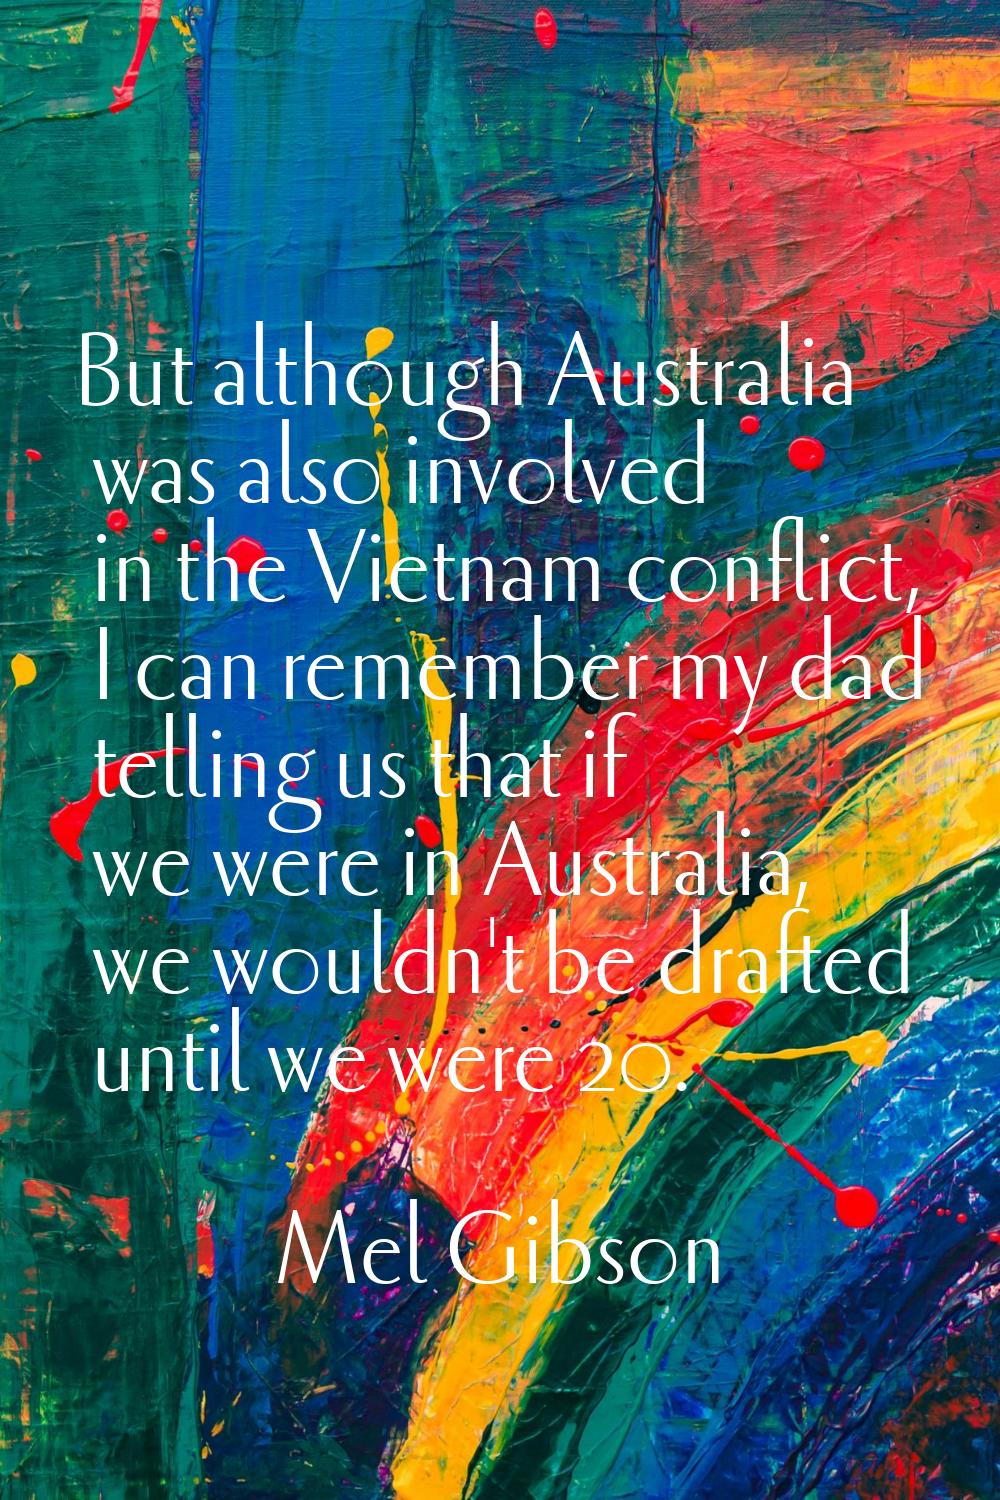 But although Australia was also involved in the Vietnam conflict, I can remember my dad telling us 